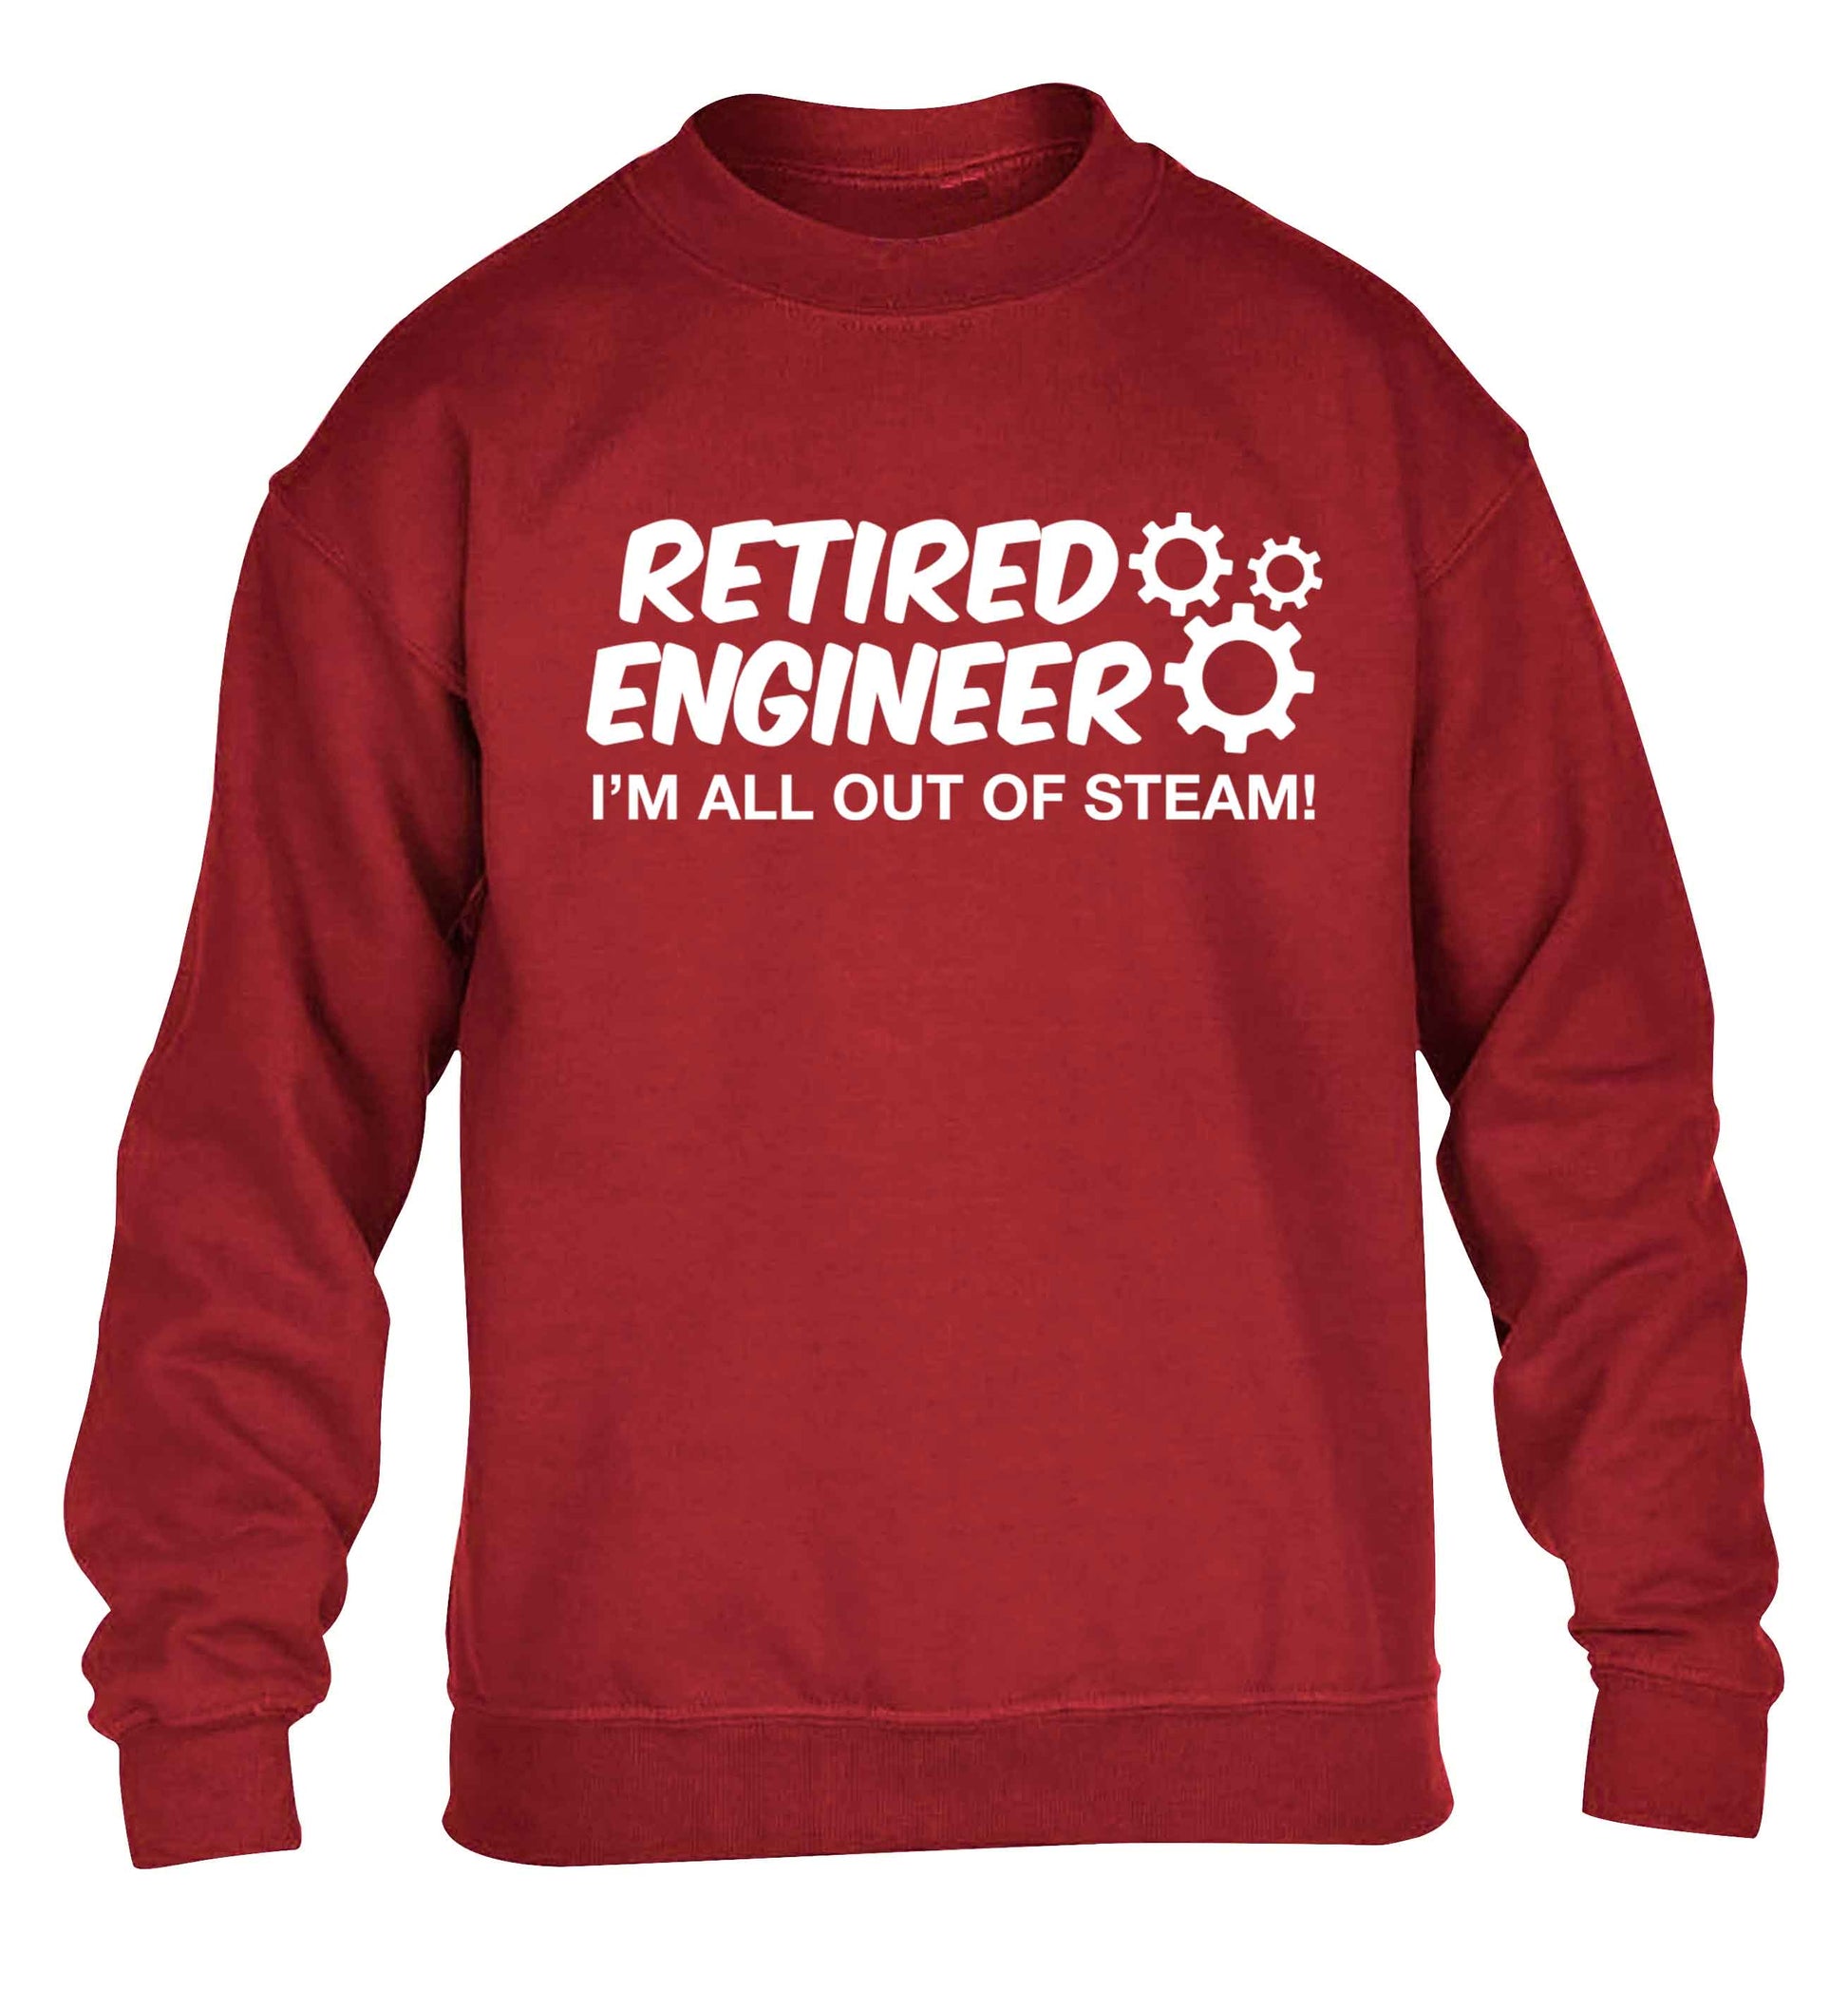 Retired engineer I'm all out of steam children's grey sweater 12-13 Years